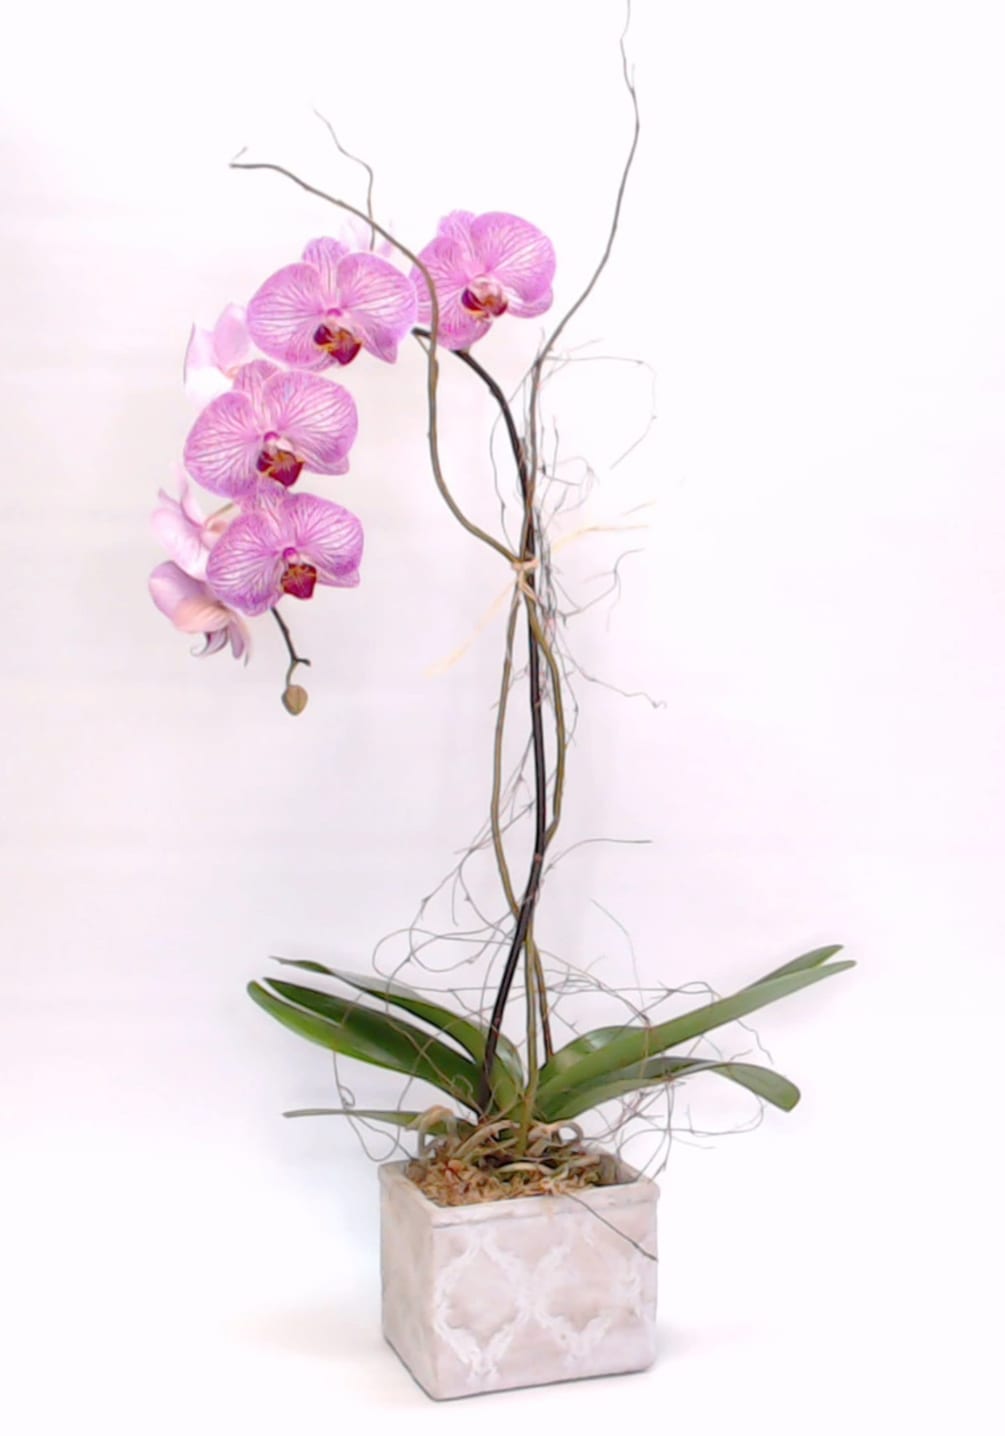 Simple elegant orchid in a decorative ceramic vessel. (Vessels and orchid patterns